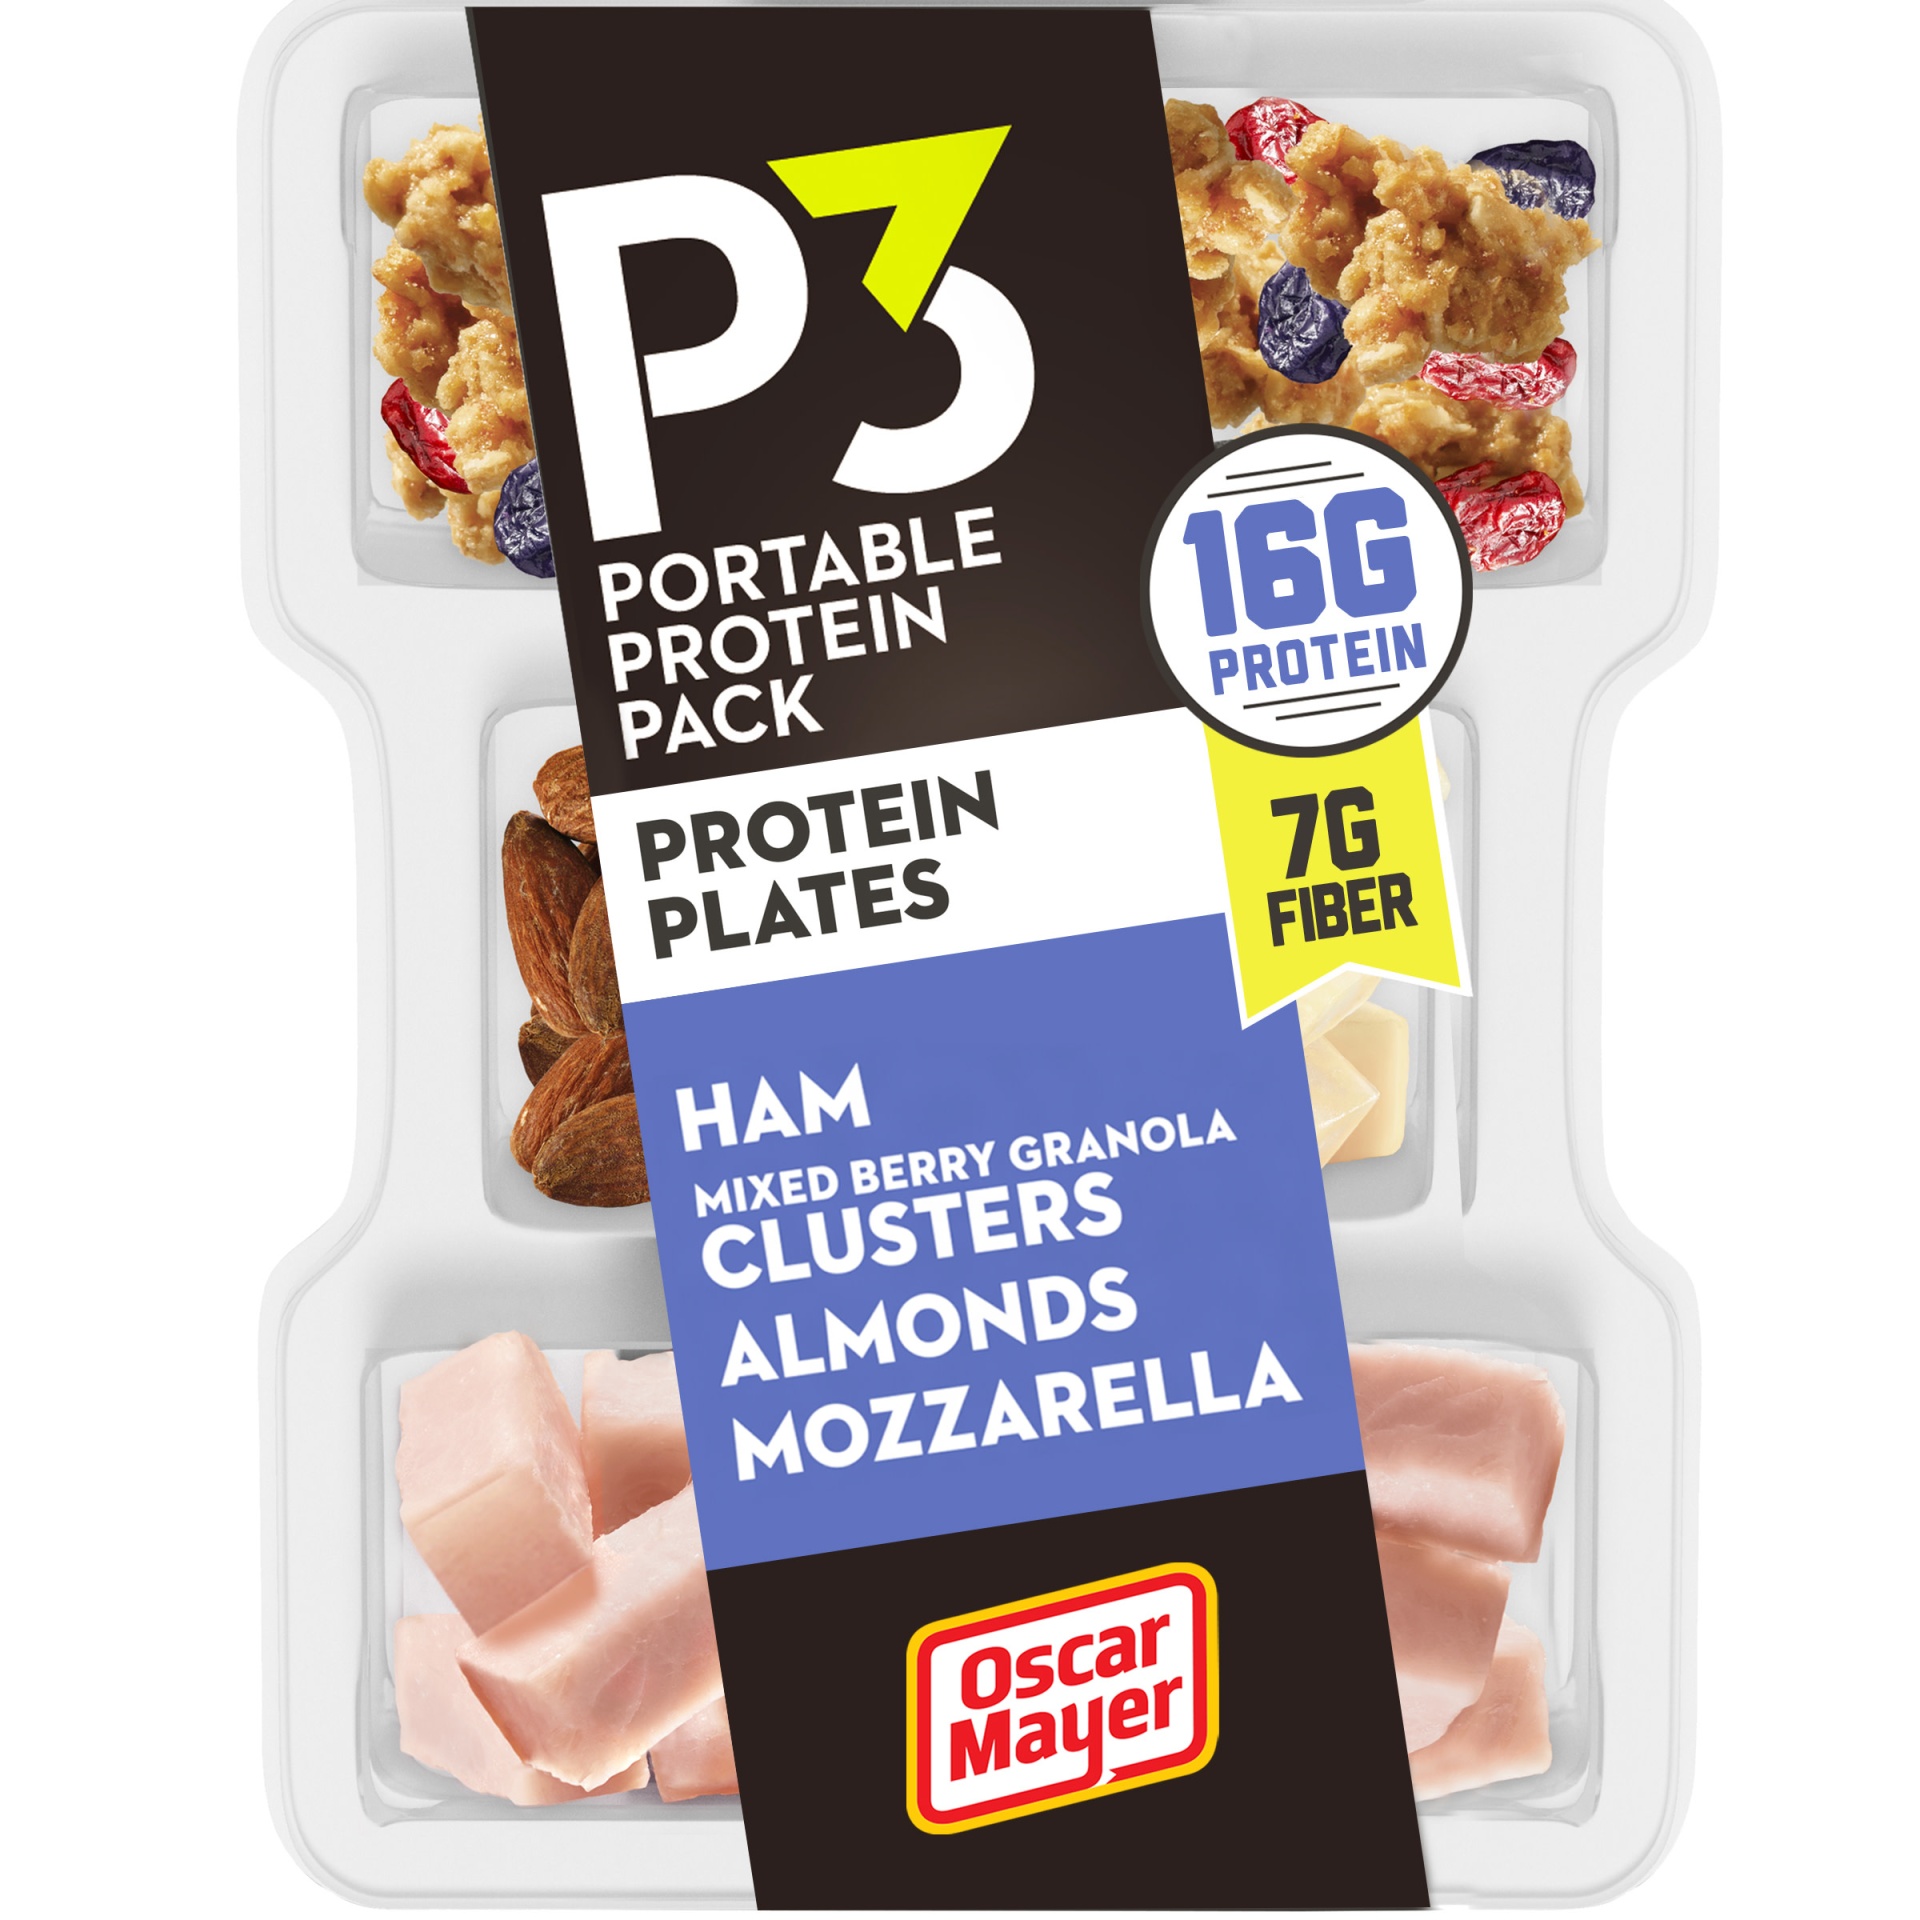 slide 1 of 6, P3 Portable Protein Snack Pack & Fiber Plate with Ham, Mixed Berry Granola Clusters, Almonds & Mozzarella Cheese Tray, 3.2 oz